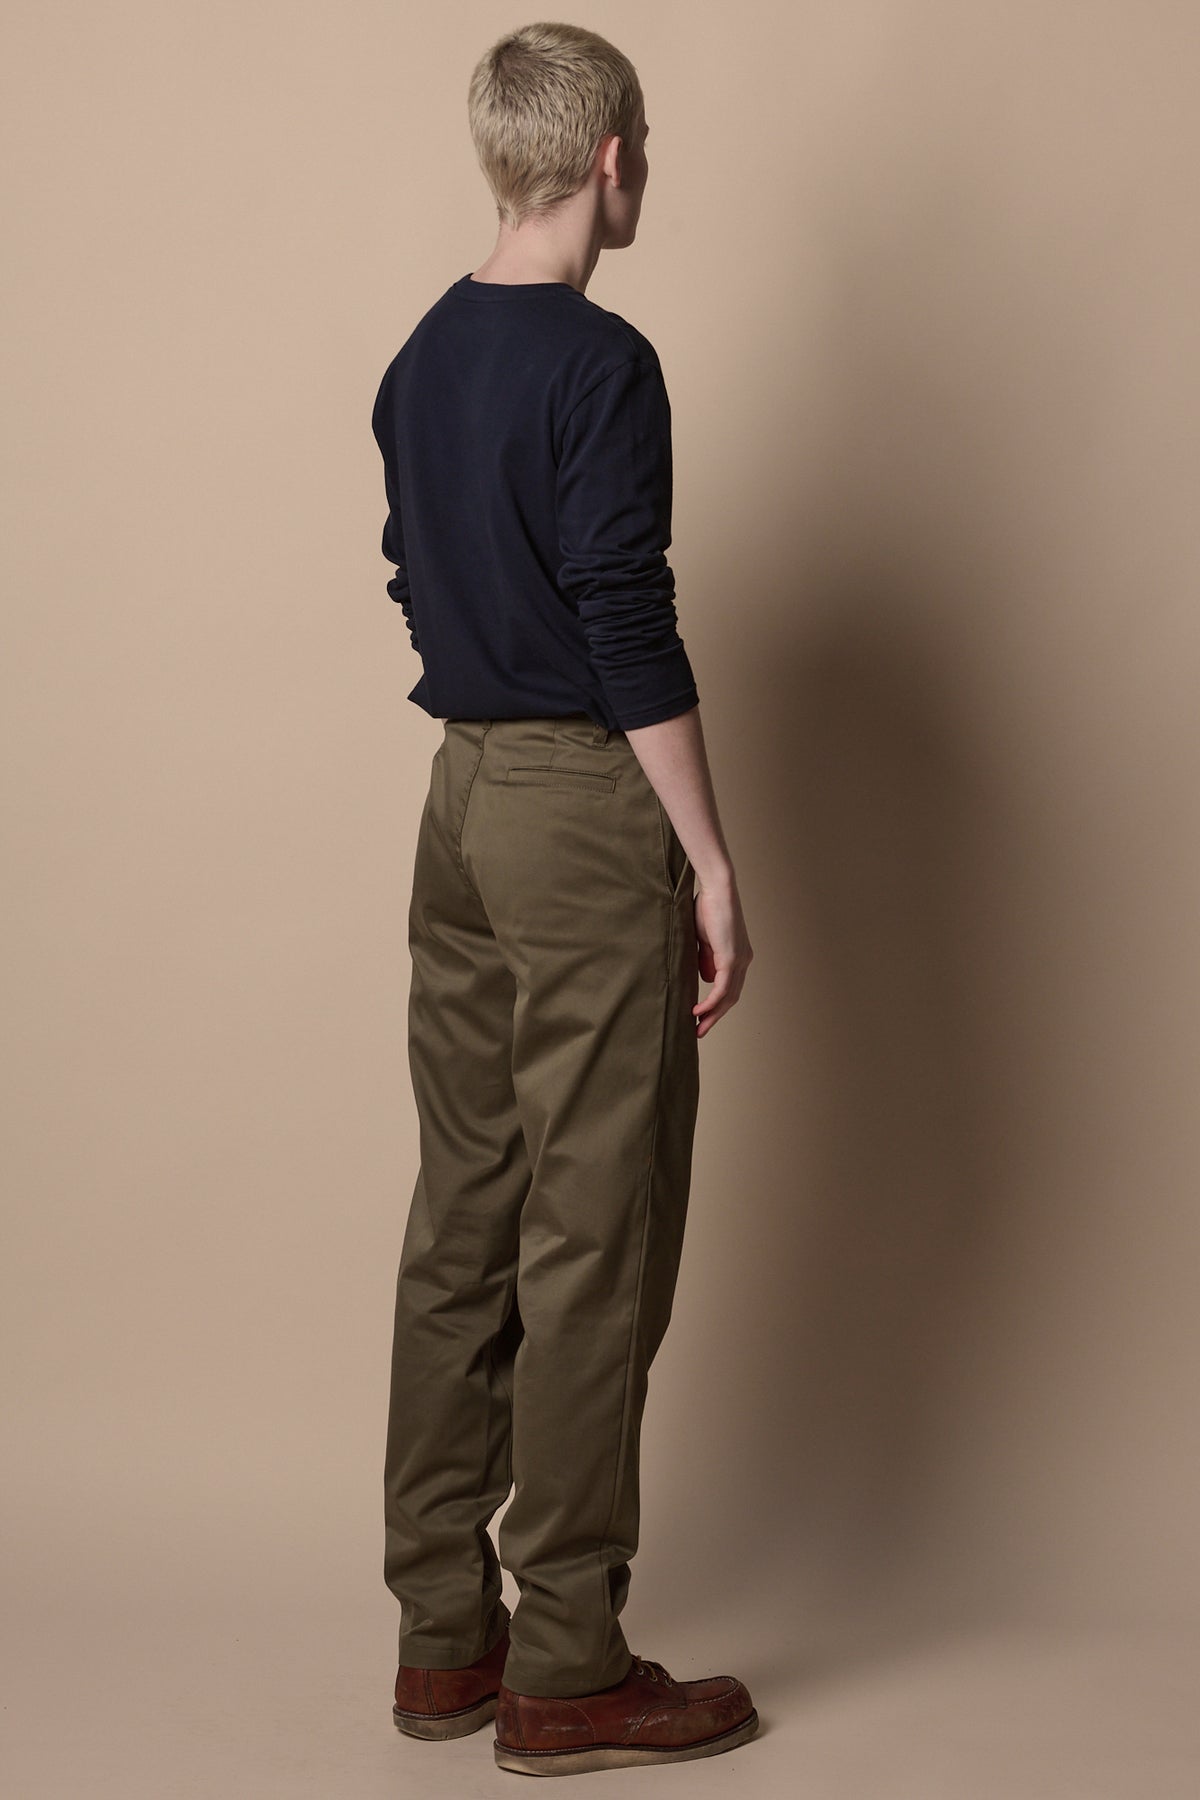 
            Back of male wearing slim chino in olive with navy t shirt tucked in